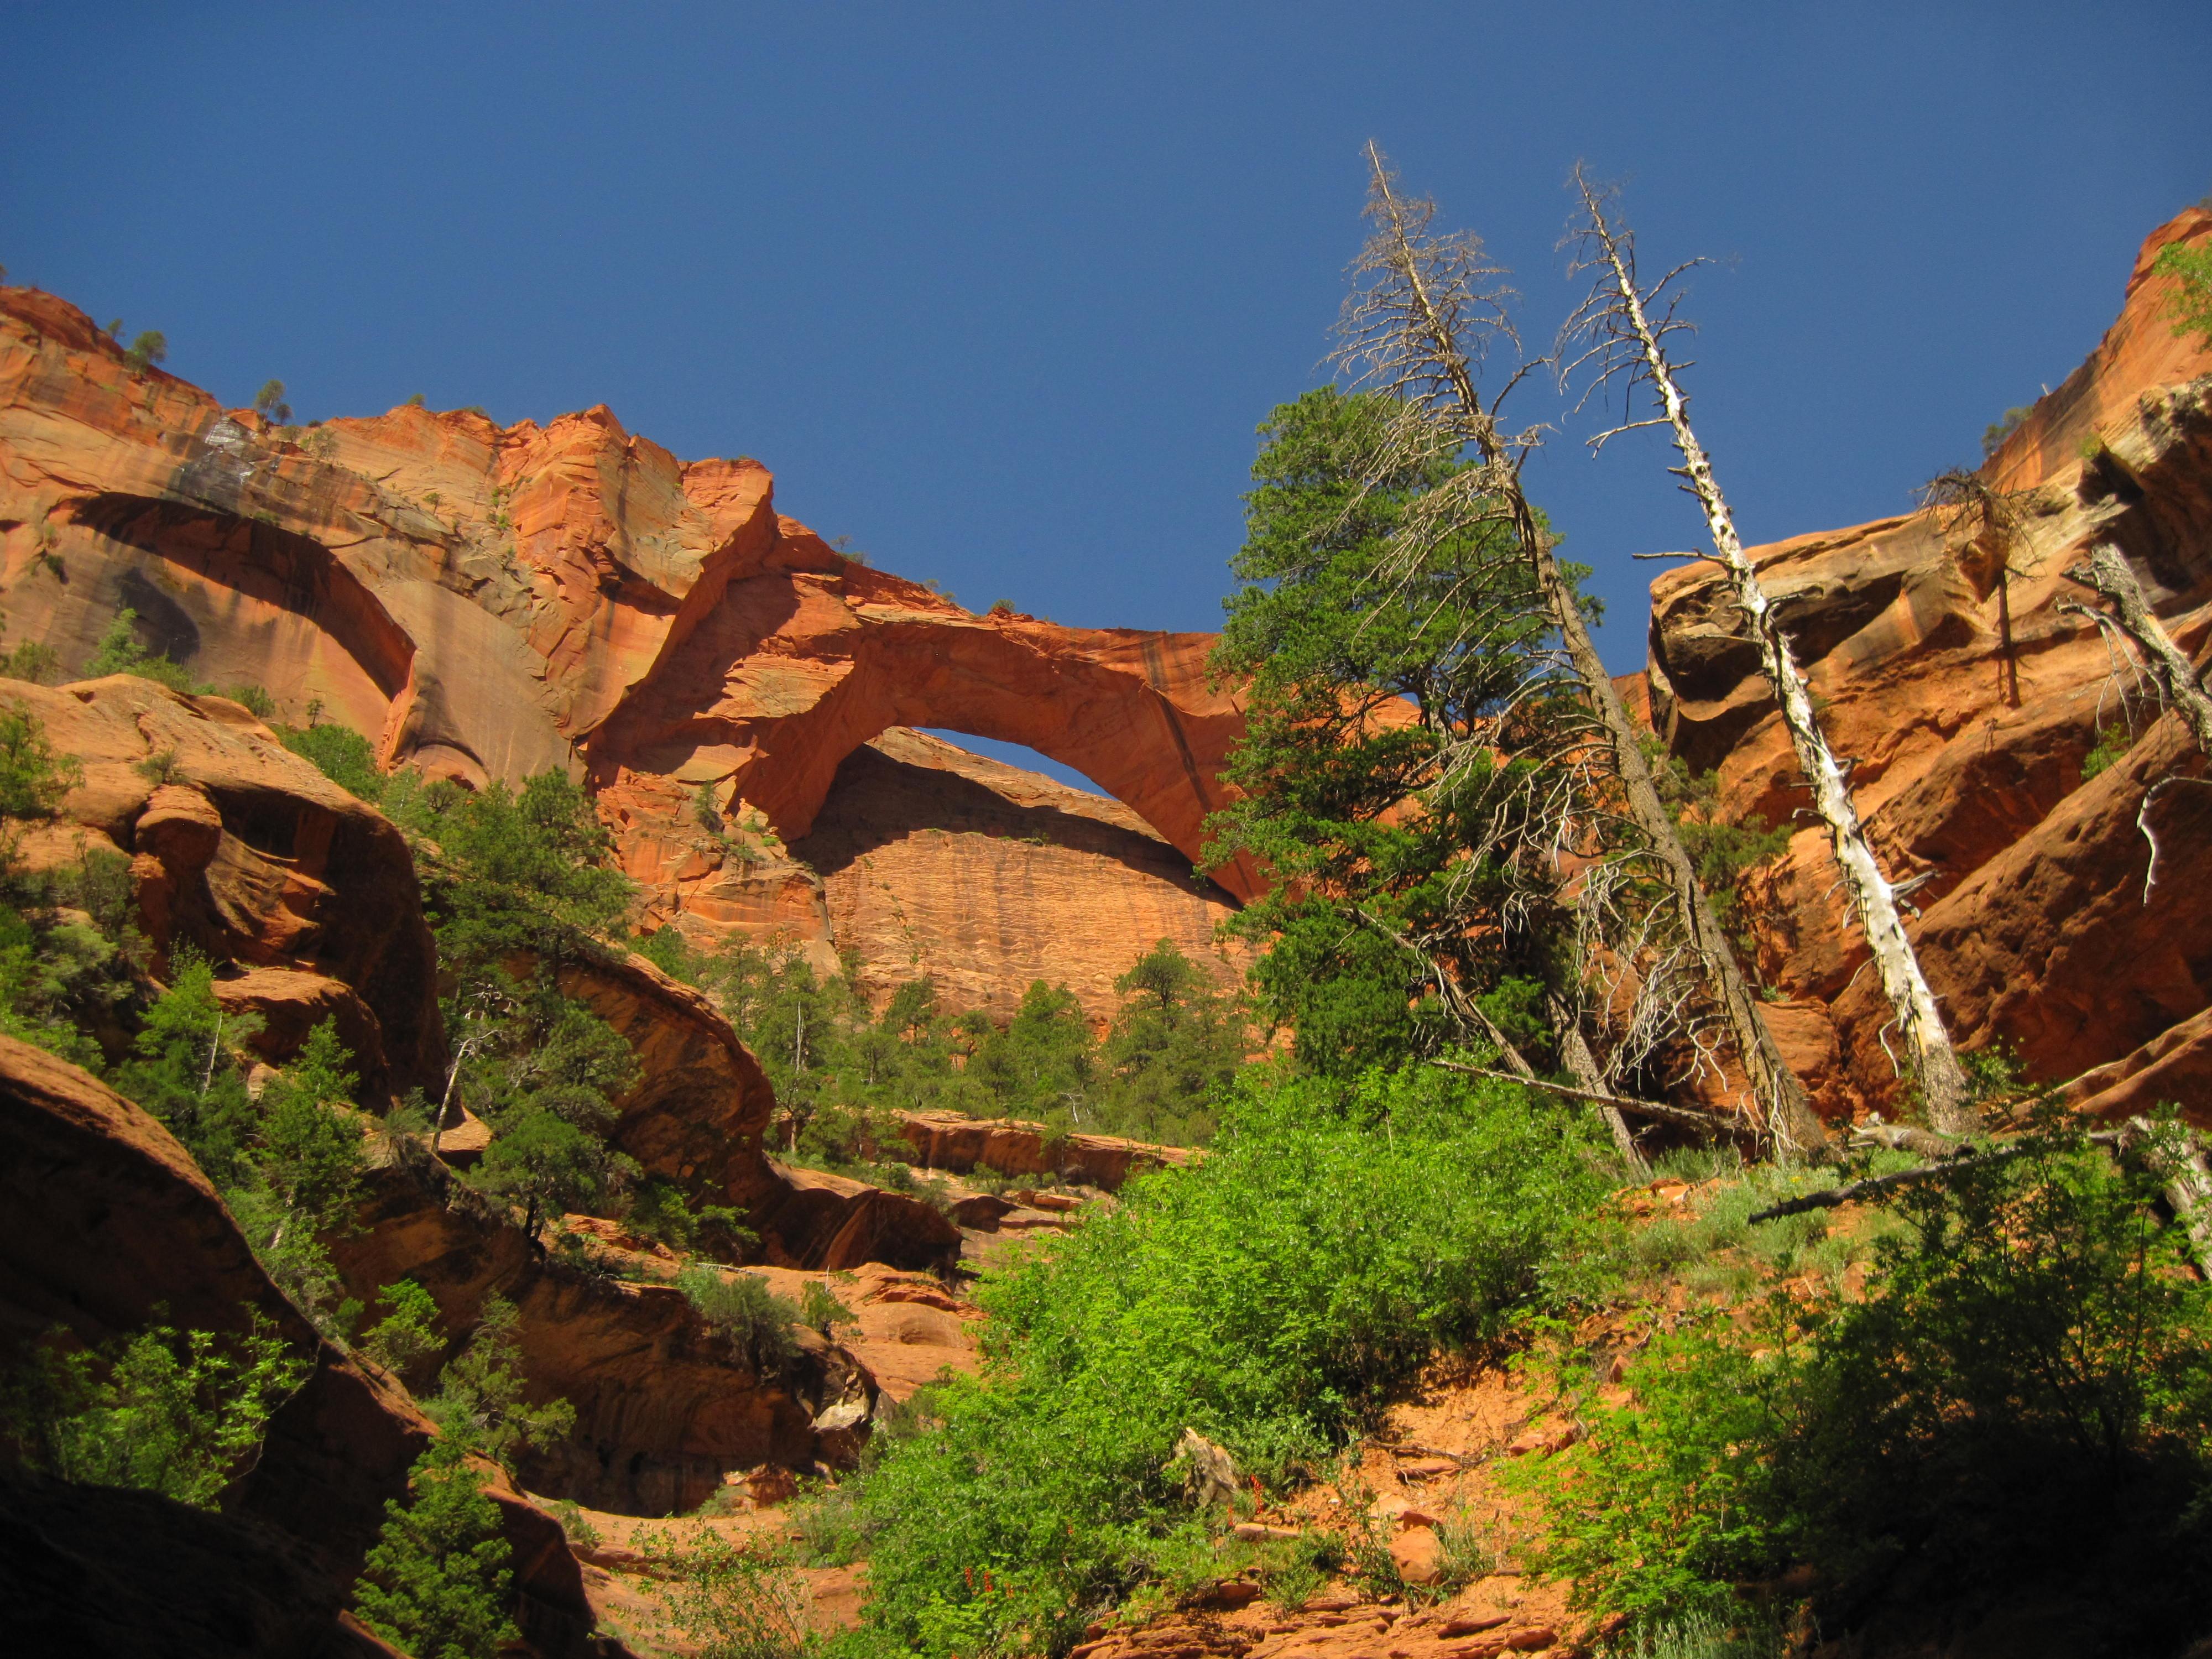 A red sandstone arch under a clear blue sky.